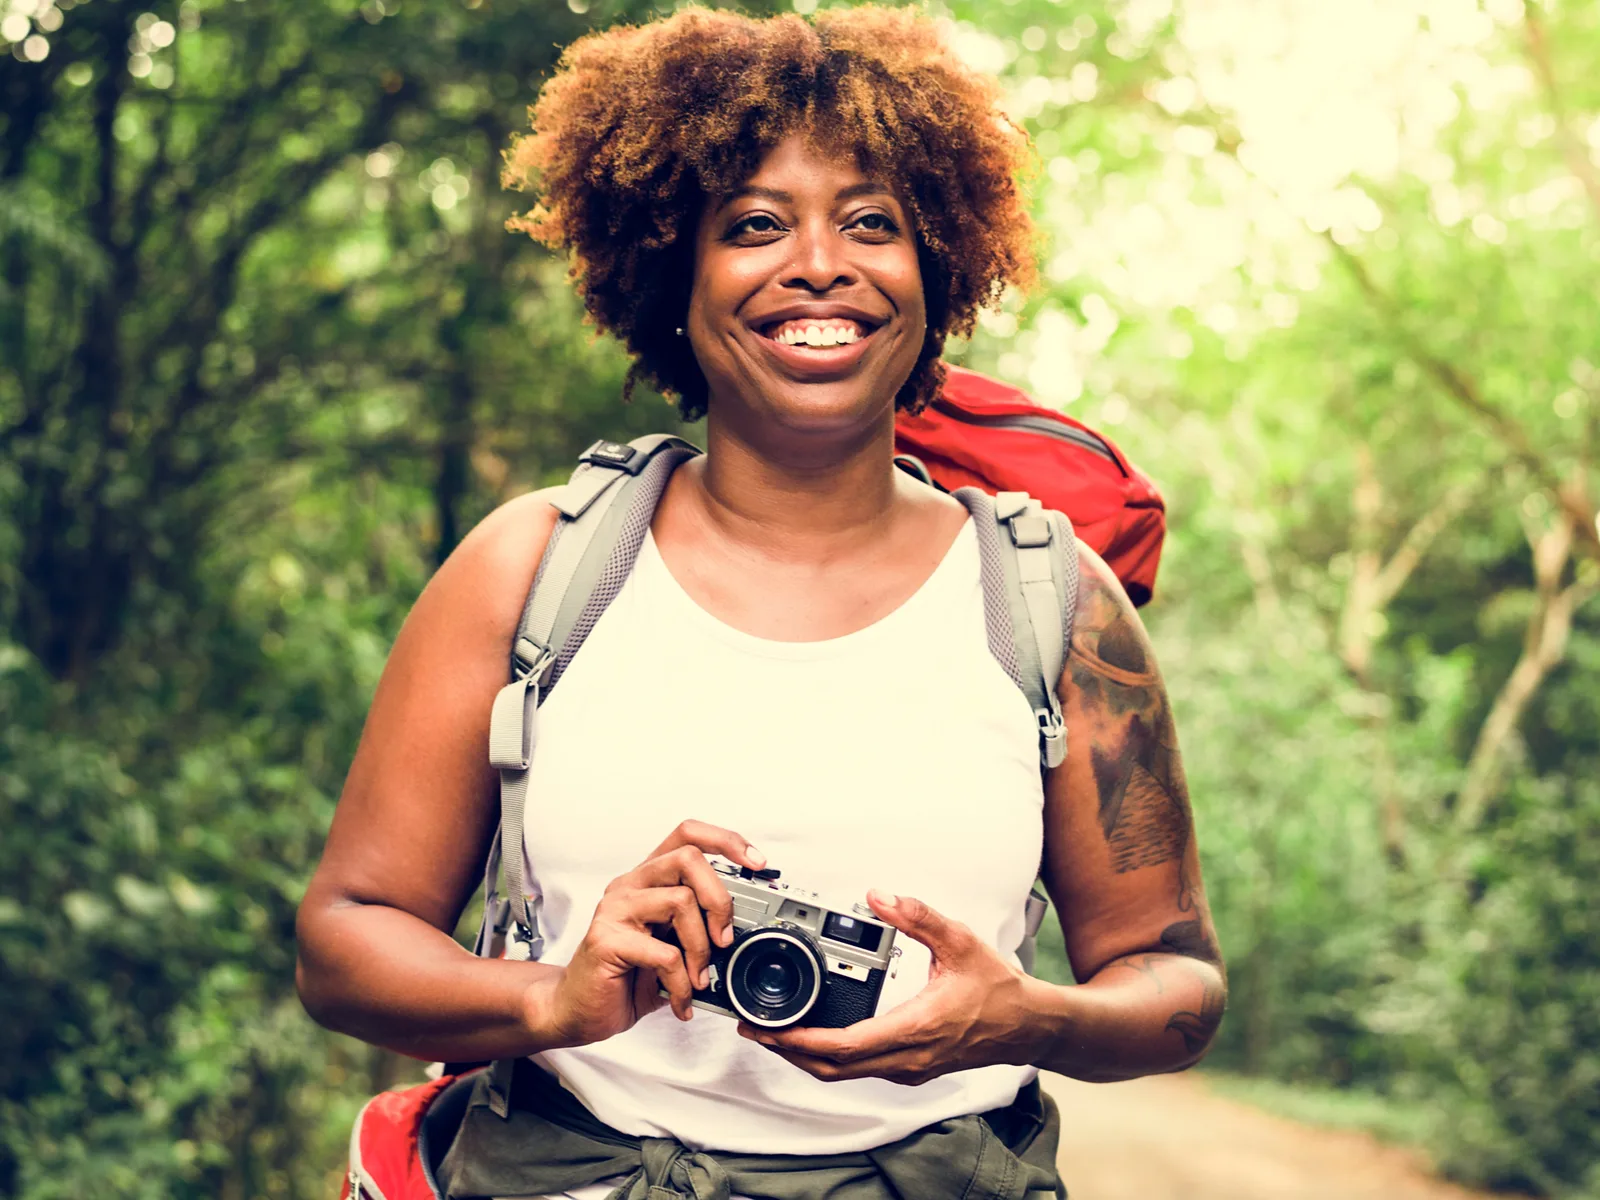 Woman with natural hair smiling as she walks through the woods on a hiking path wearing one of the best hiking camera backpacks that's red in color